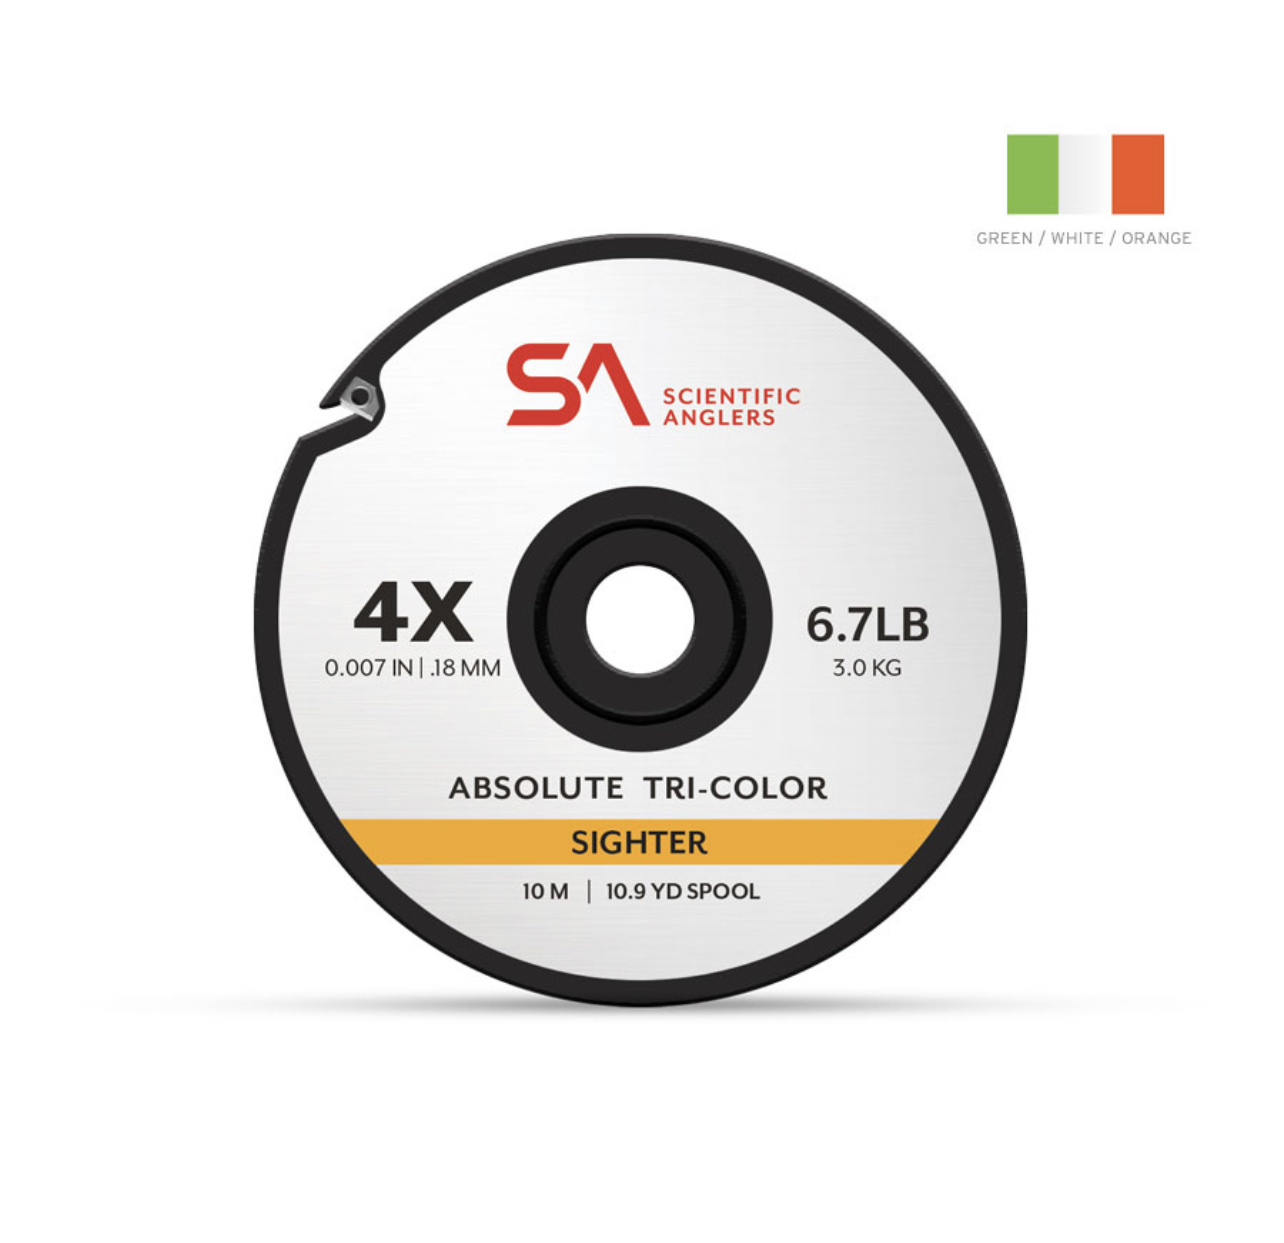 Scientific Anglers Absolute Tri-Color Sighter Tippet - 10m - 2X - 8.8lb